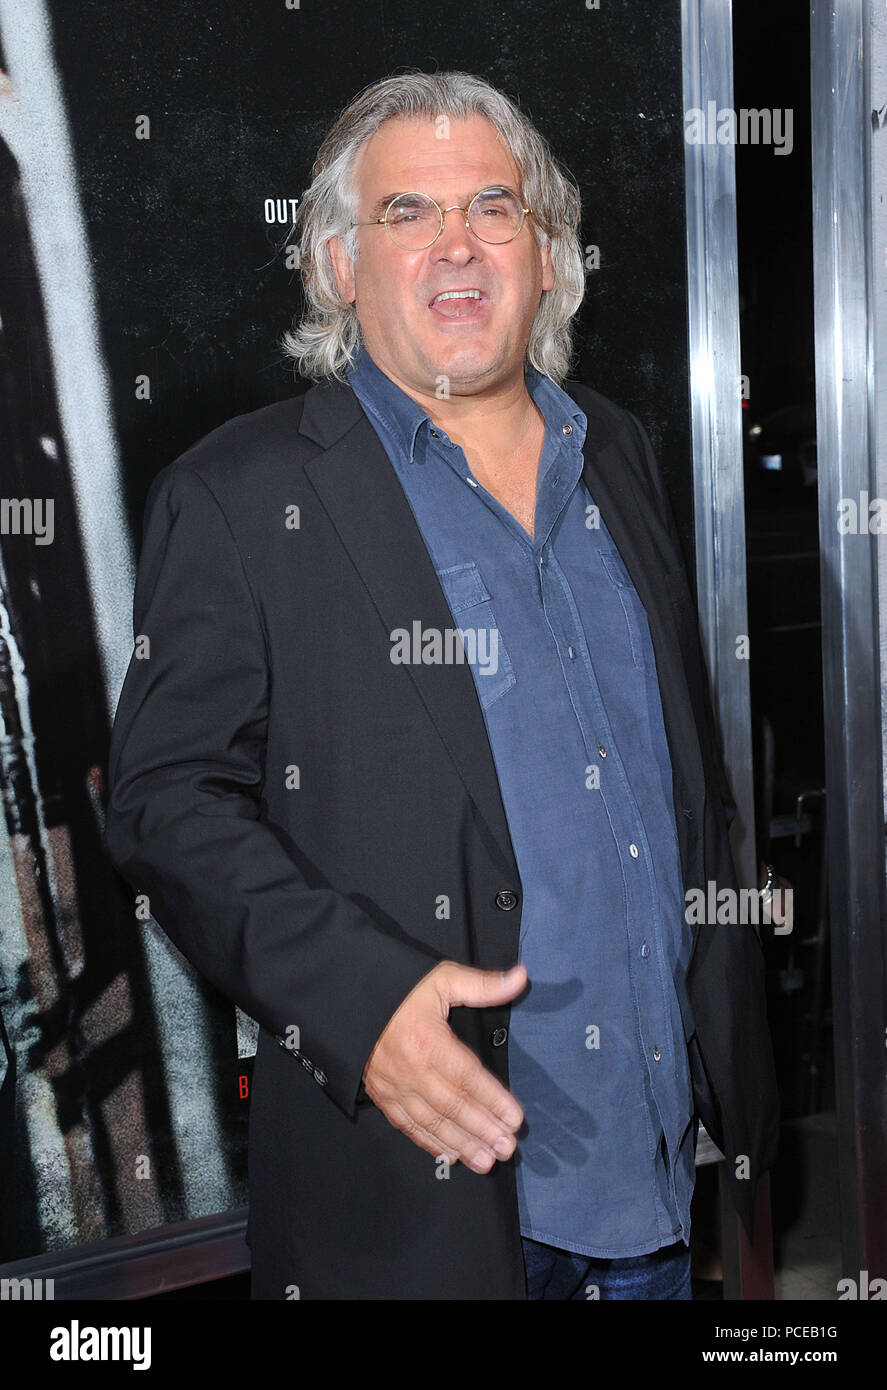 Paul Greengrass Director Arriving At The Captain Phillips Premiere At The Academy Of Motion